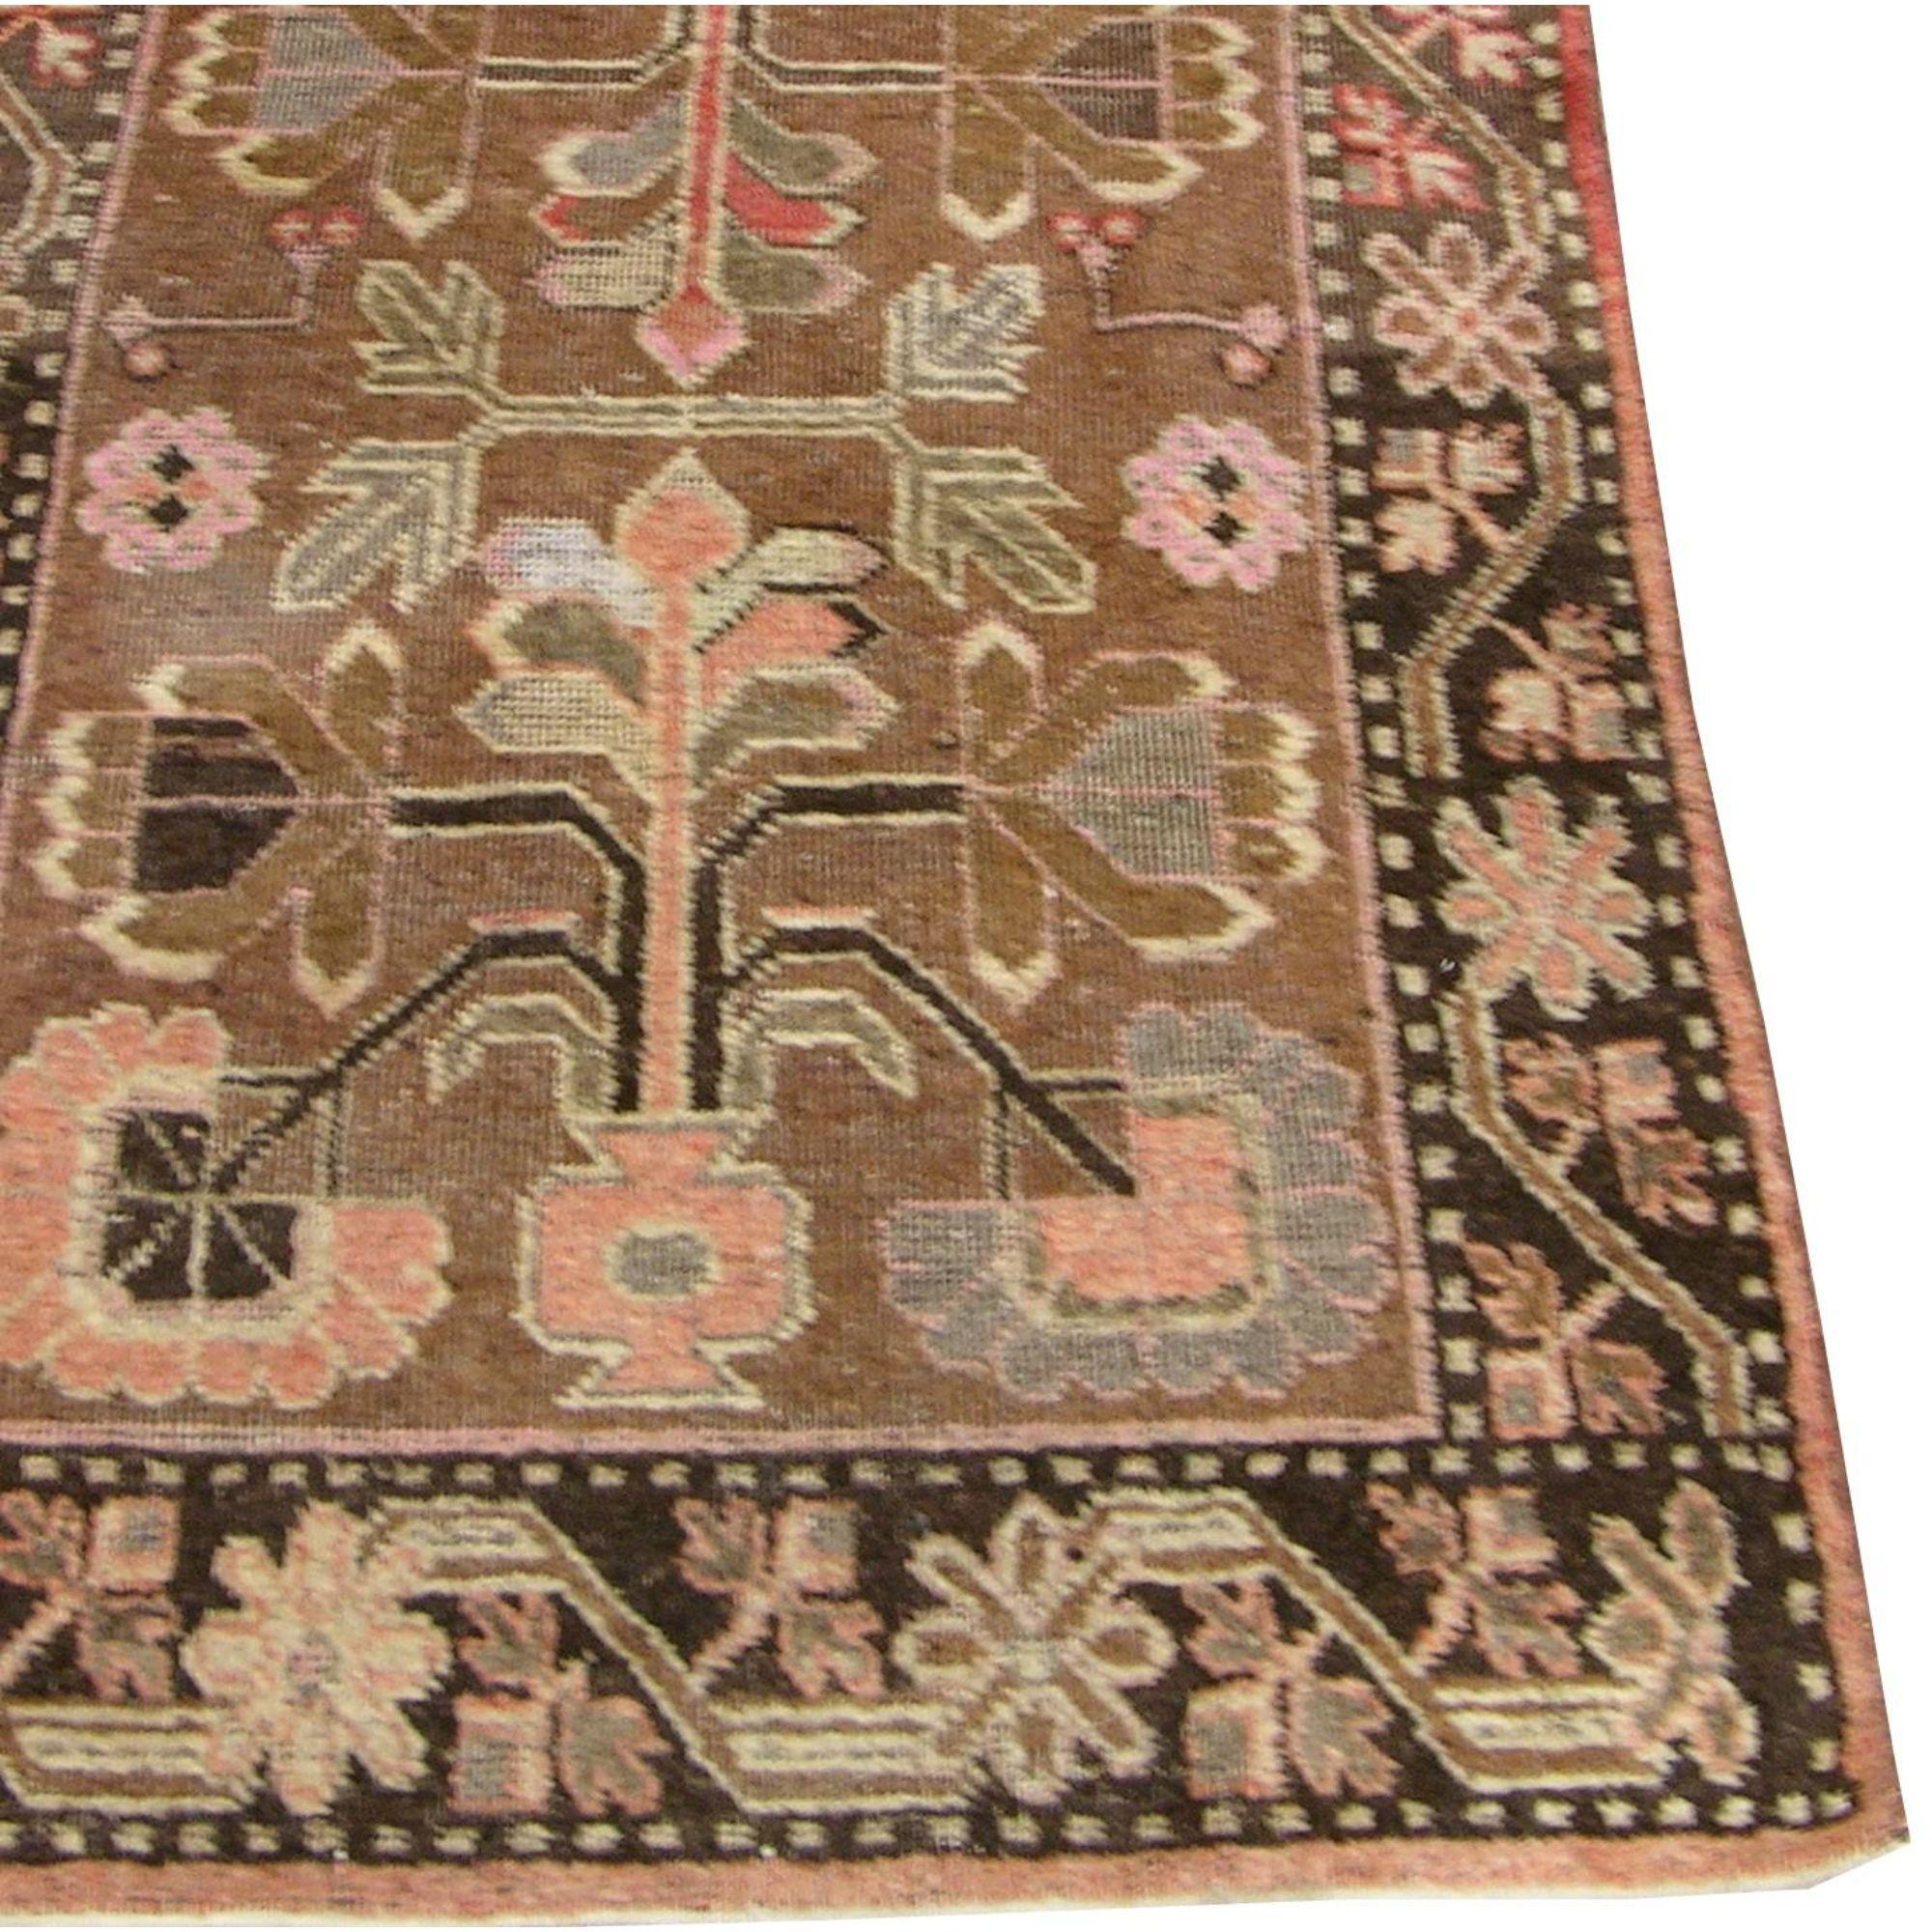 Ca.1900 Authentic Samarkand Rug 4'8'' x 2'9'', Tribal and Traditional, Wool on cotton foundation